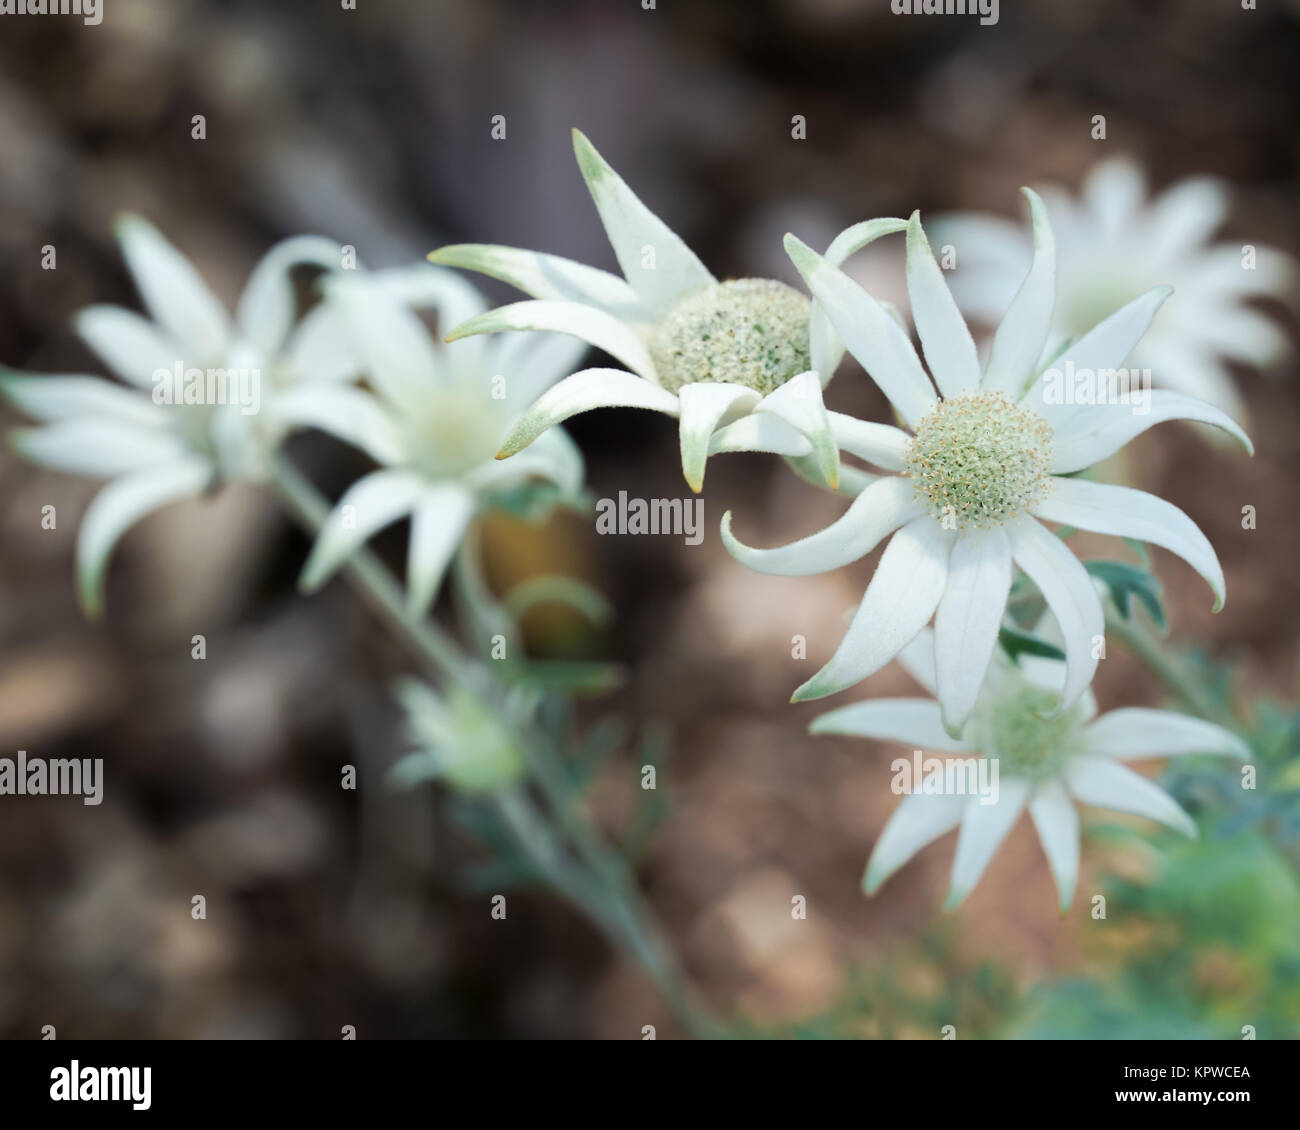 Bunch of Flannel Flowers on the plant. A native Australian flowering plant. Stock Photo